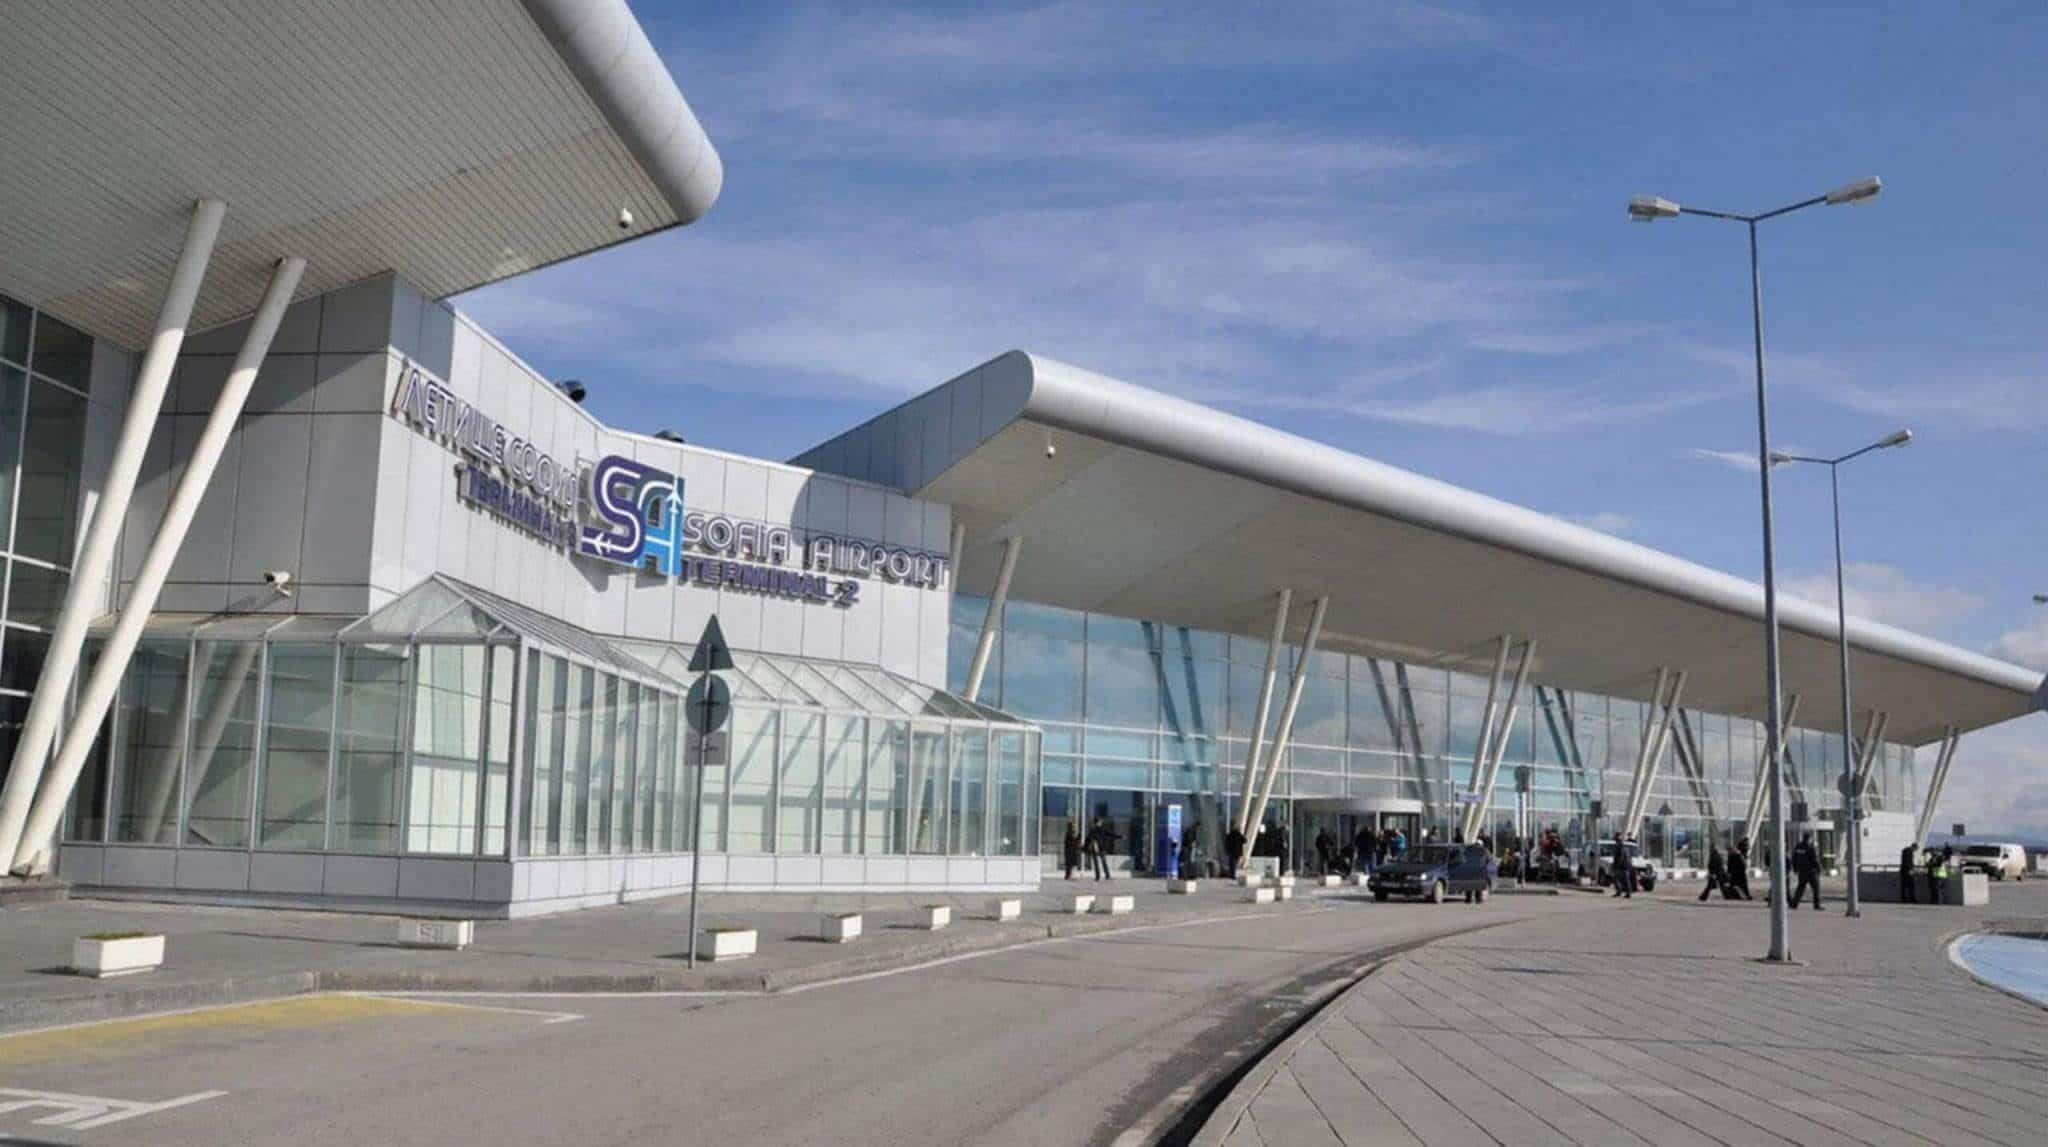 Over 621,000 Passengers Passed Through Sofia Airport In May